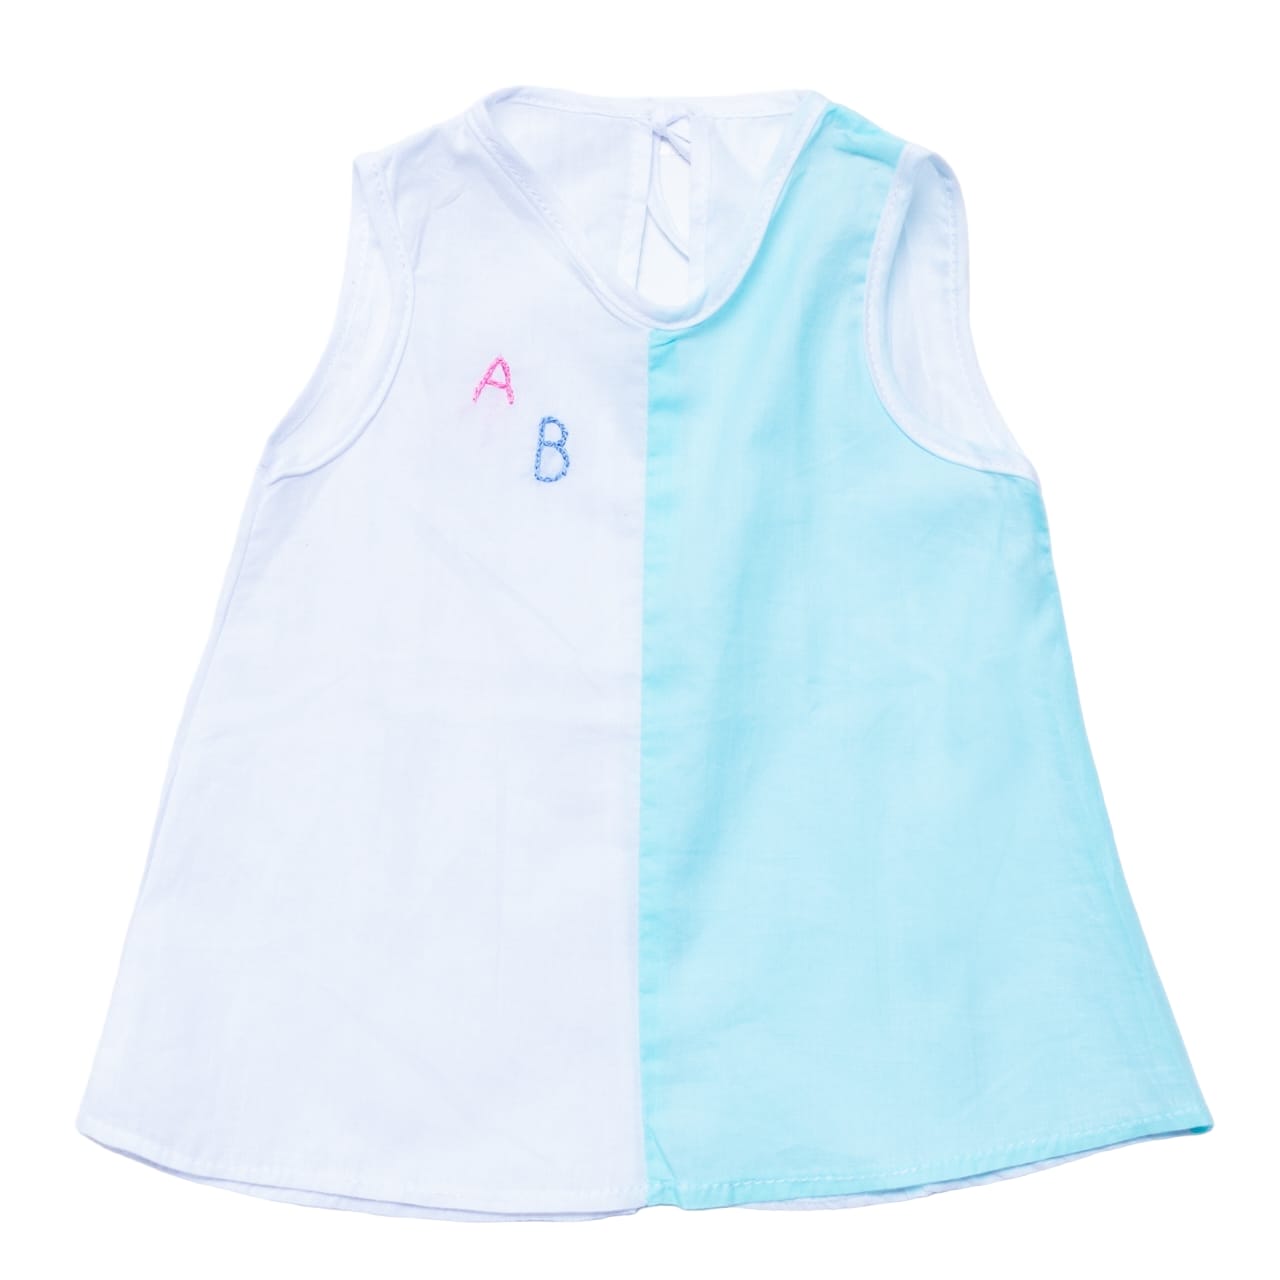 Two Color Baby Shirt - Letter Embroidered